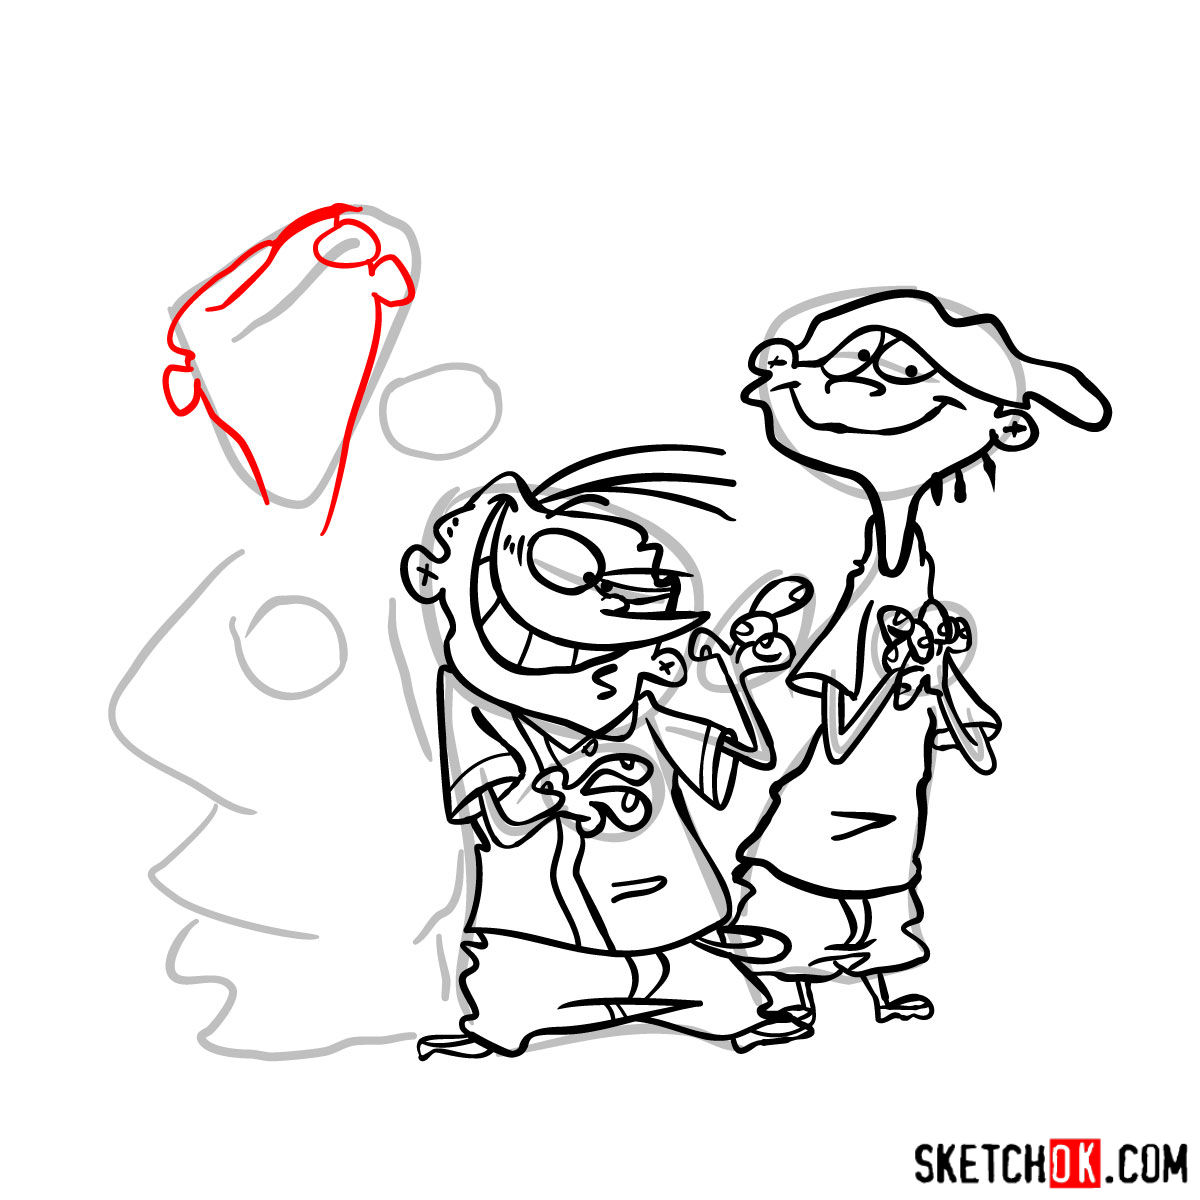 How to draw Ed, Edd and Eddy together - step 21